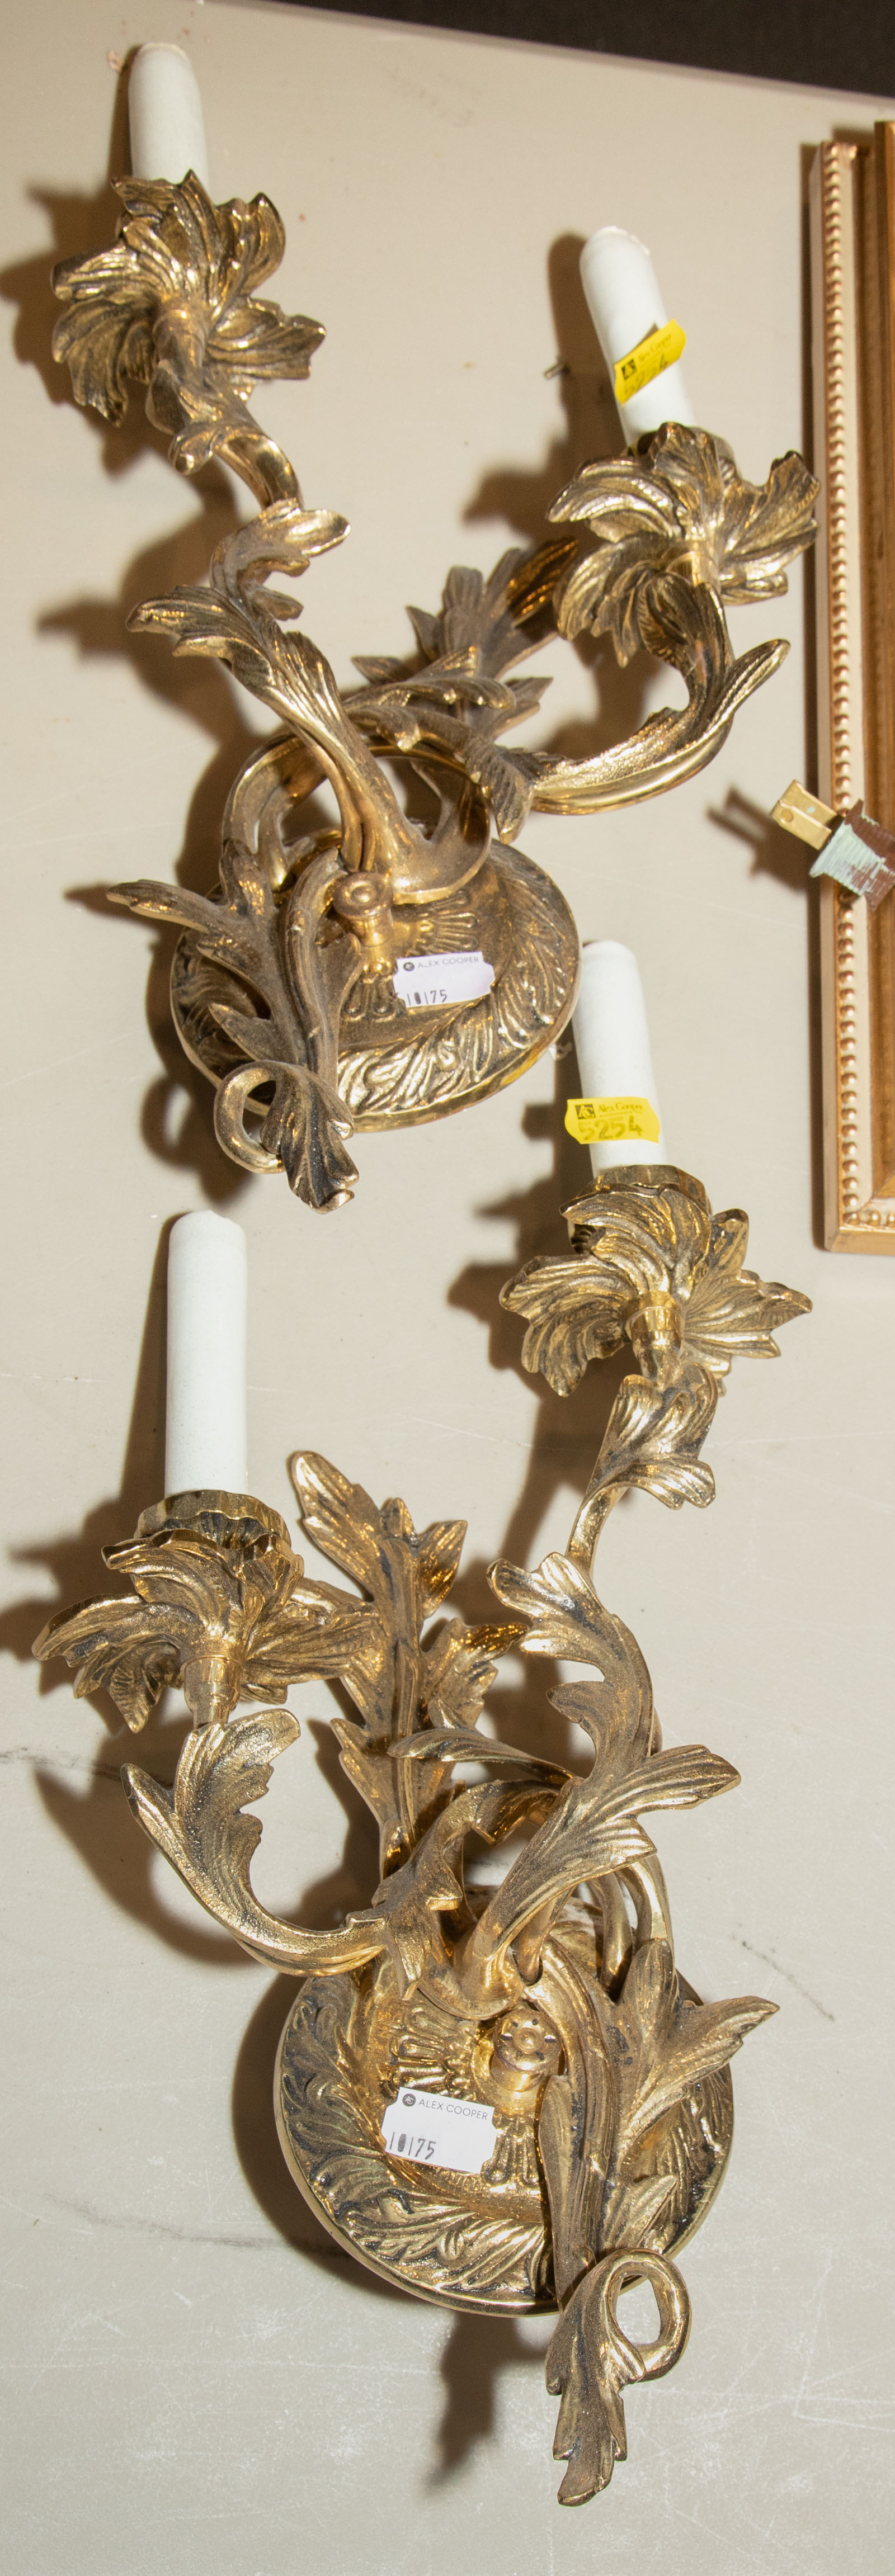 A PAIR OF ROCOCO STYLE BRASS WALL 289c8d